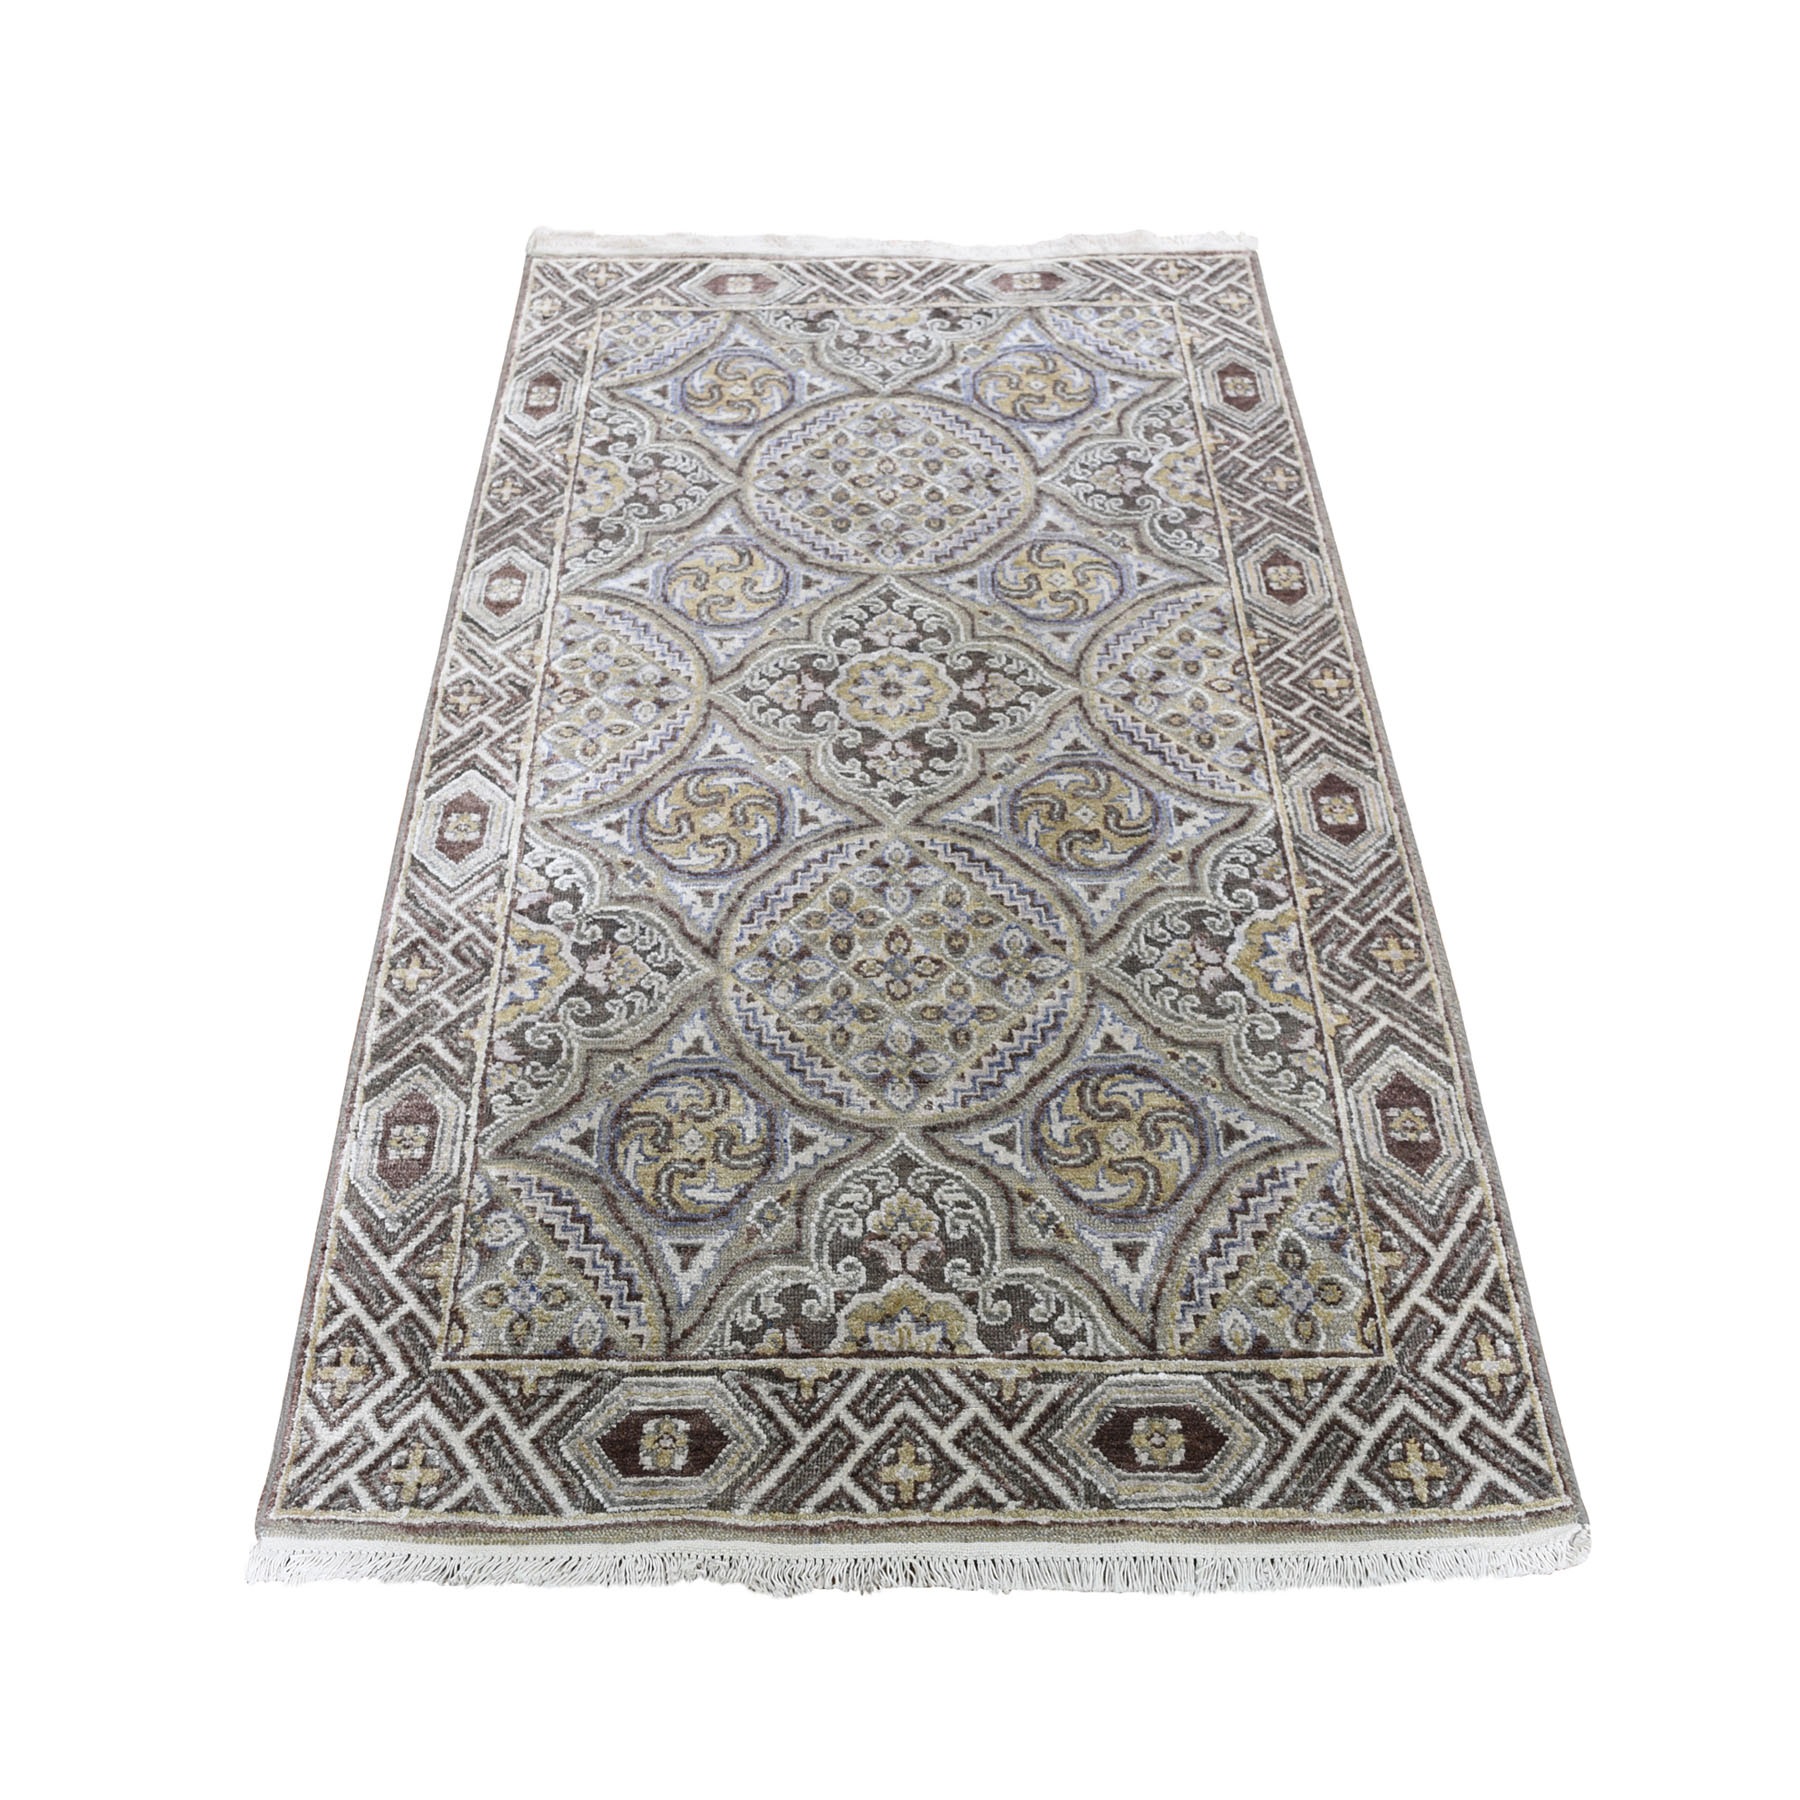 3-x5-2  Textured Wool and Silk Mughal Inspired Medallions Hand-Knotted Oriental Rug 